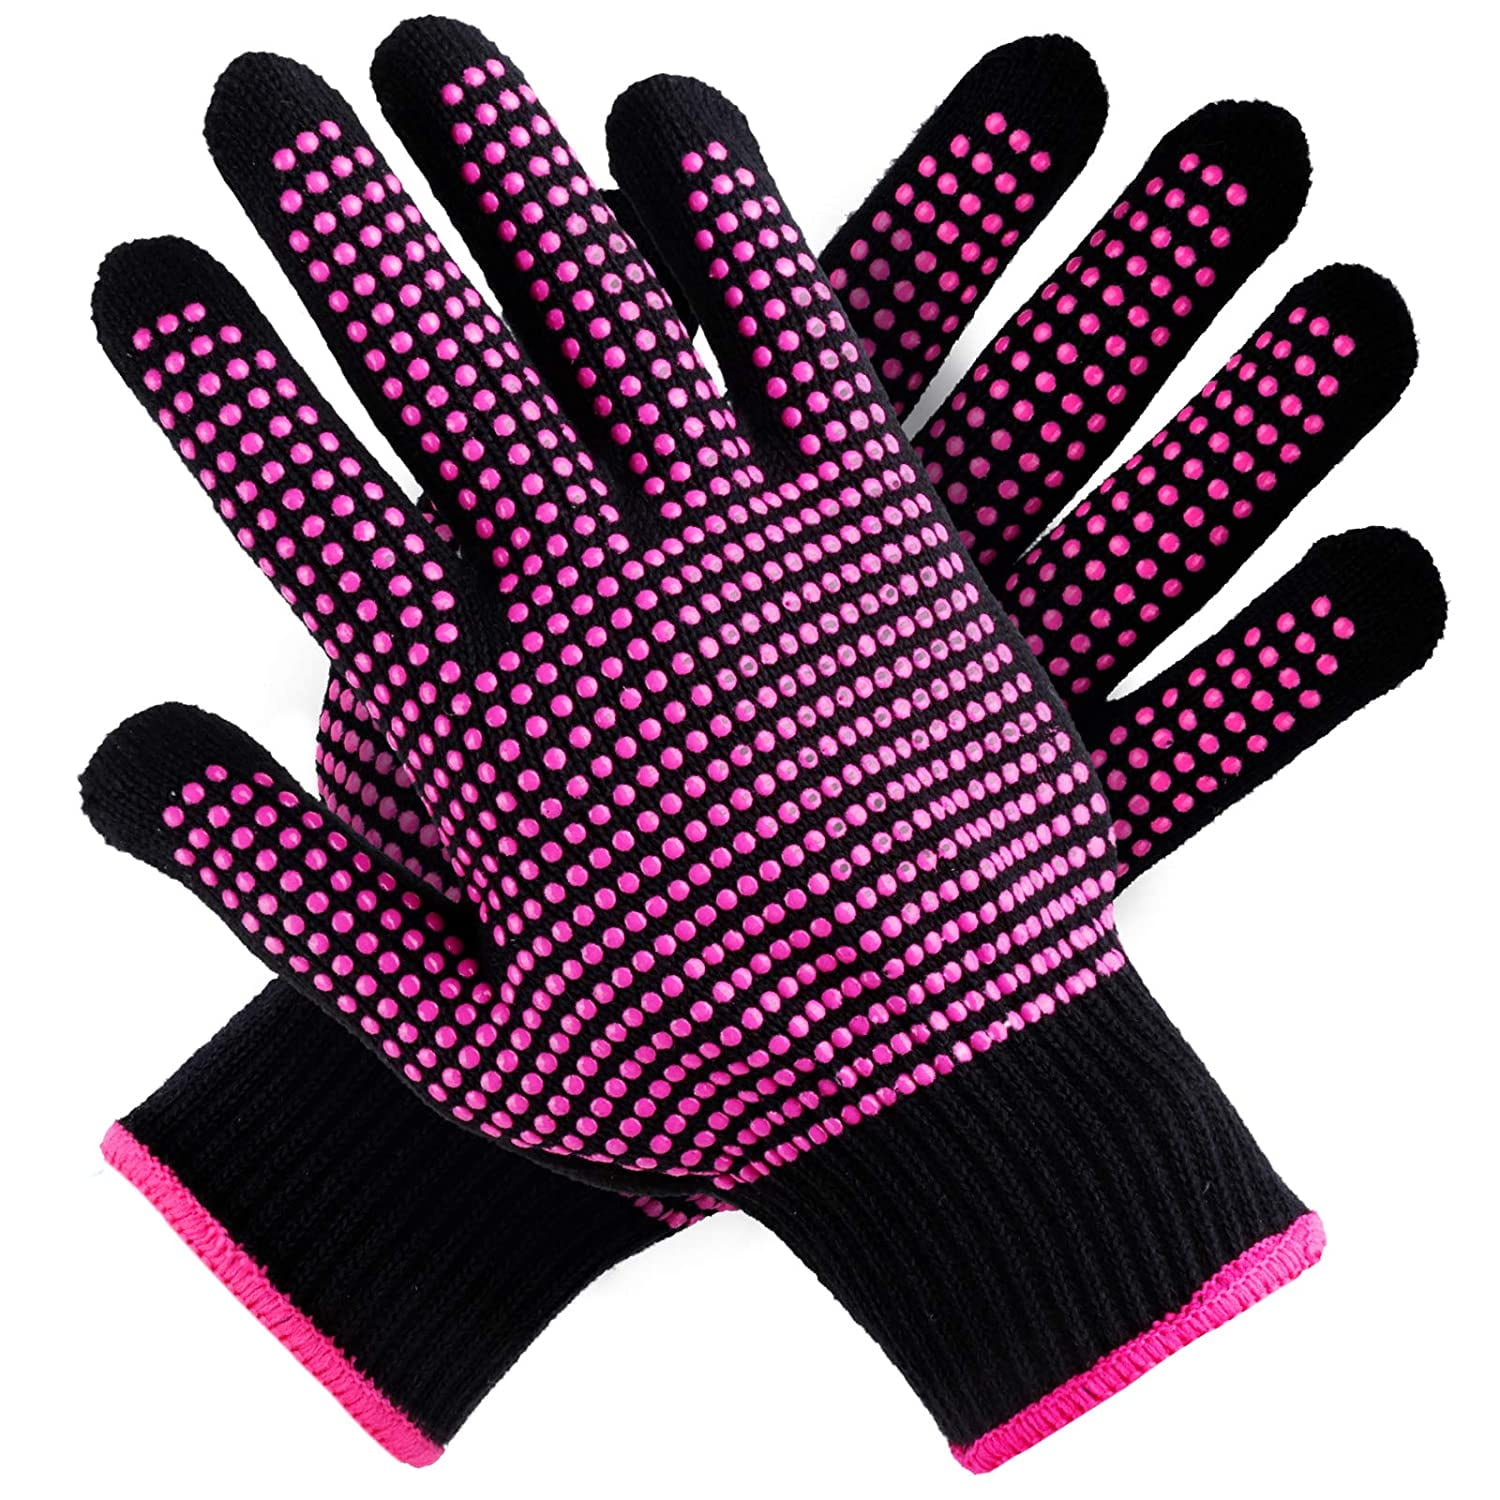 2pcs Professional Heat Hair Styling Curling Anti-Scalding Resistant Glove 